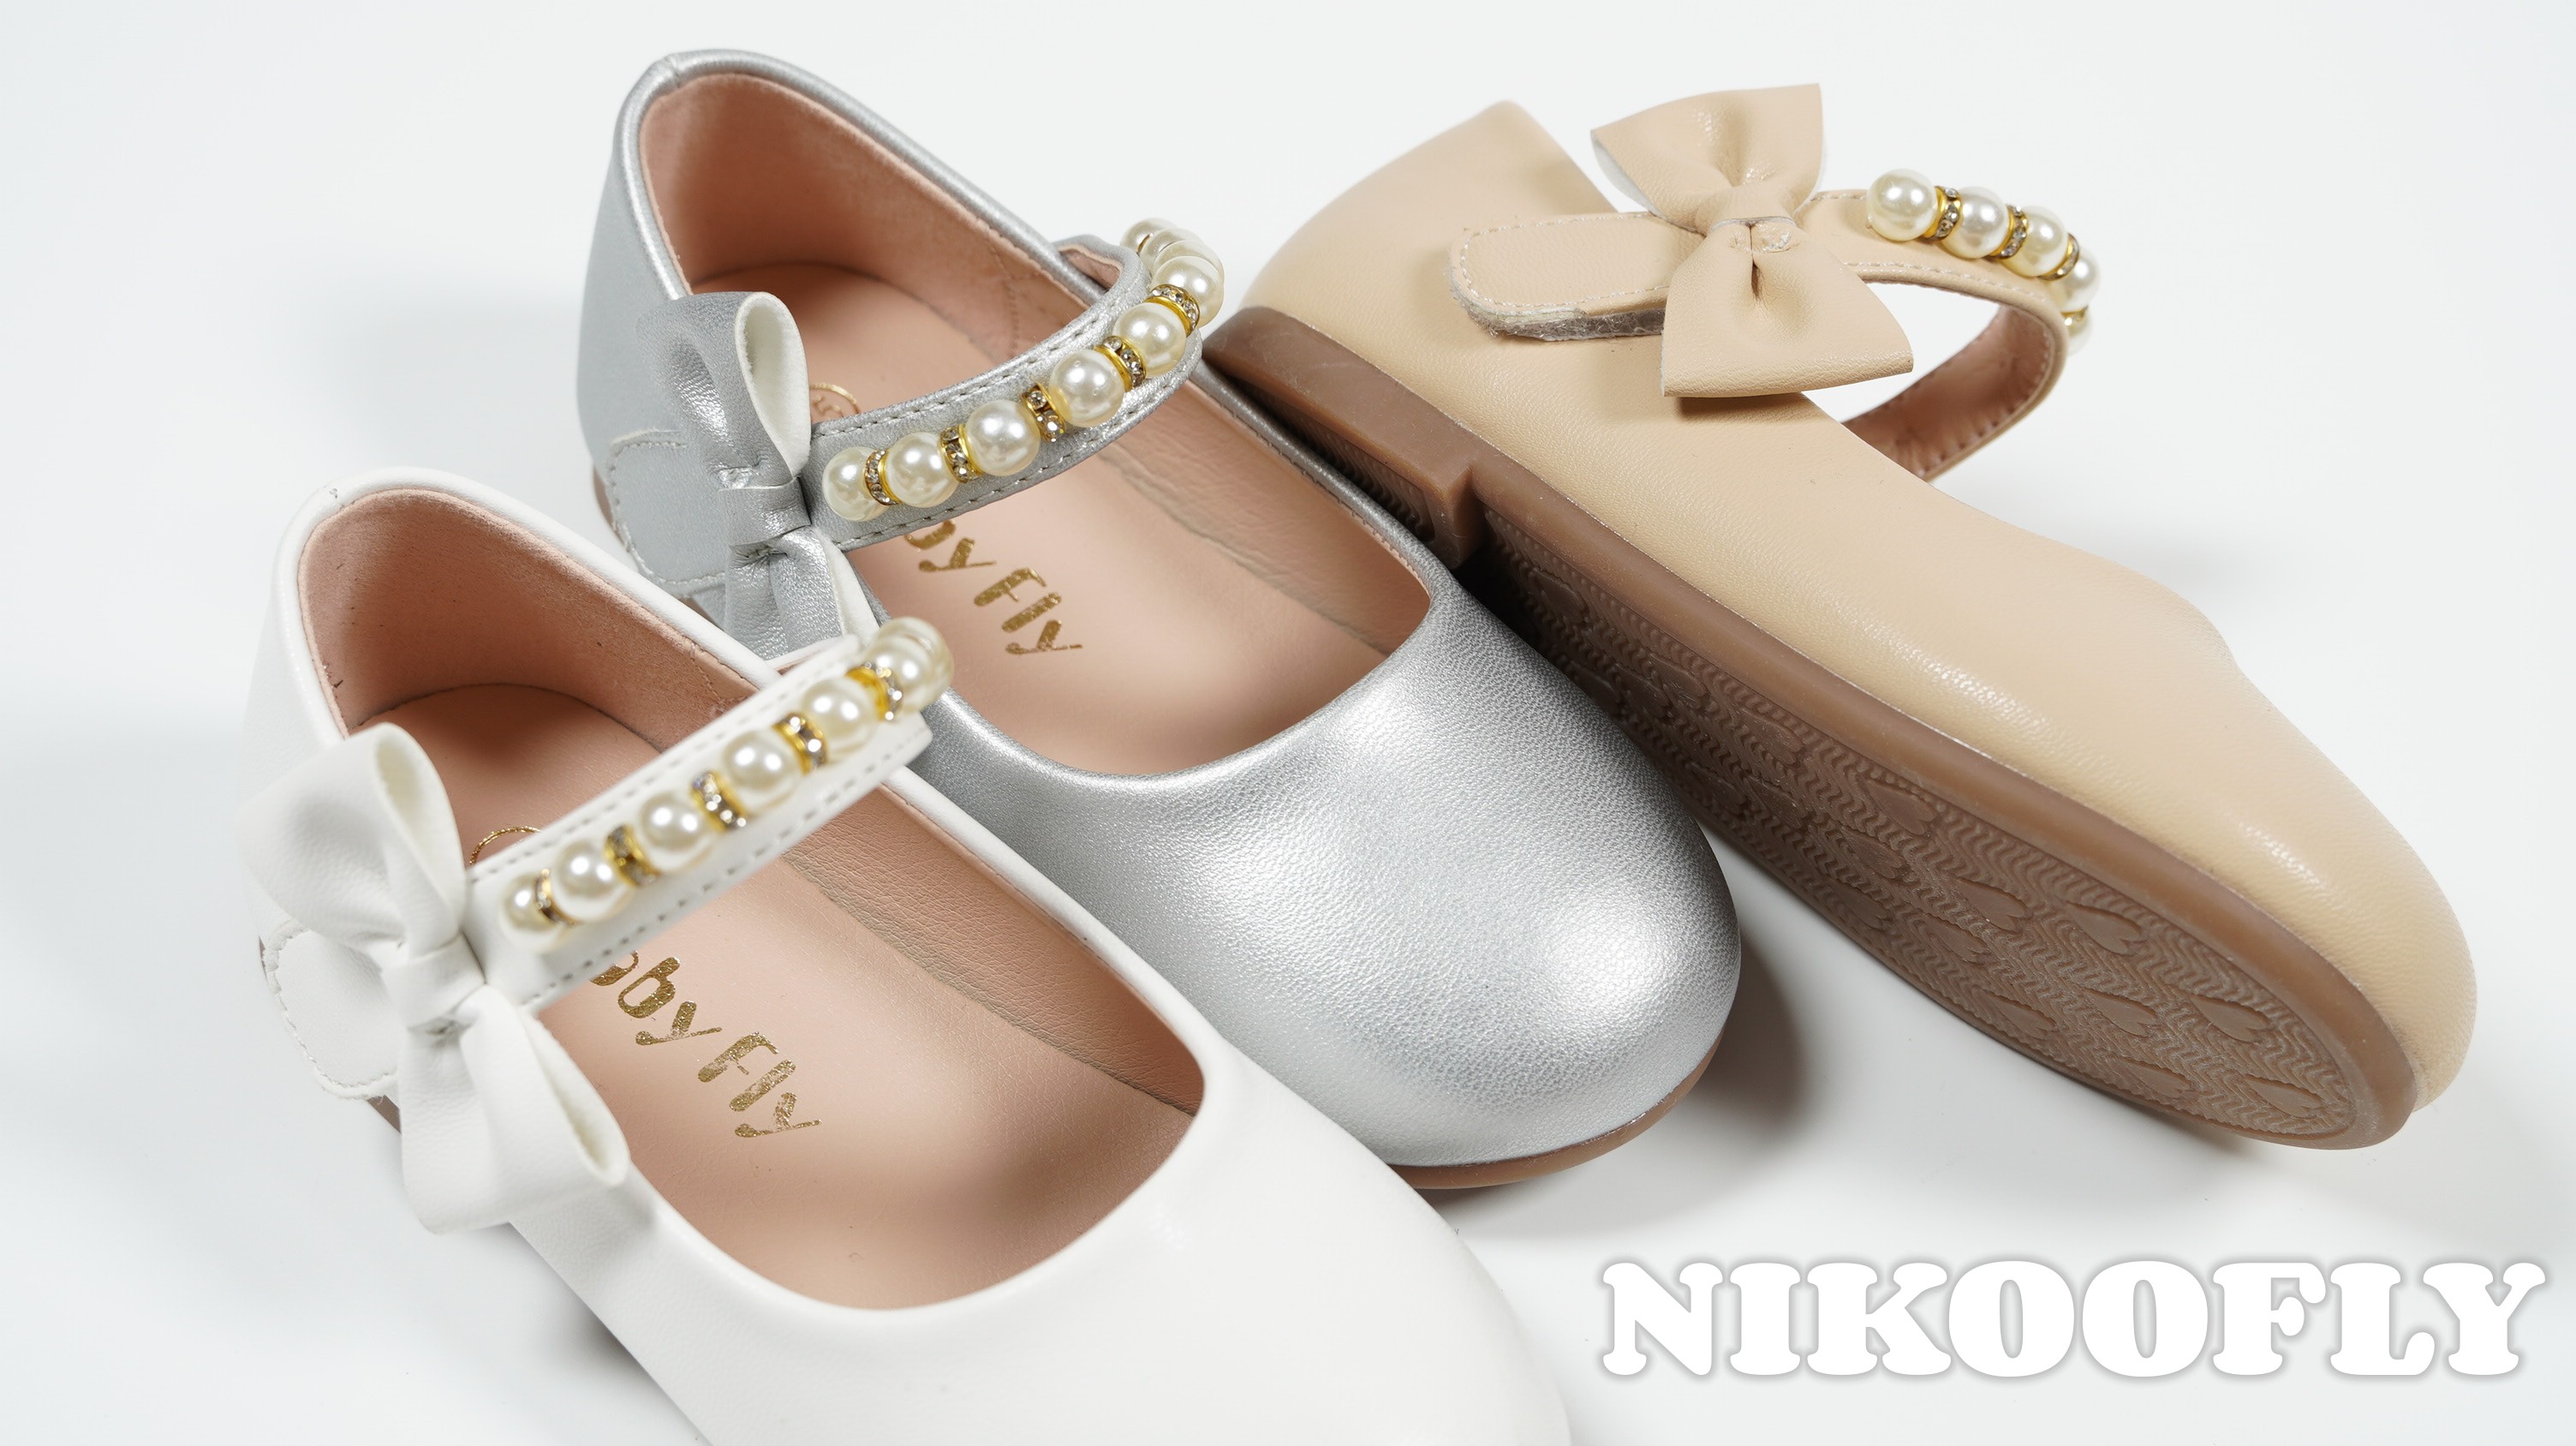 Off-White-Bow-Pearl-Straps-Mary-Janes-Ballerina-Shoes-Nikoofly-HSA5602K-9